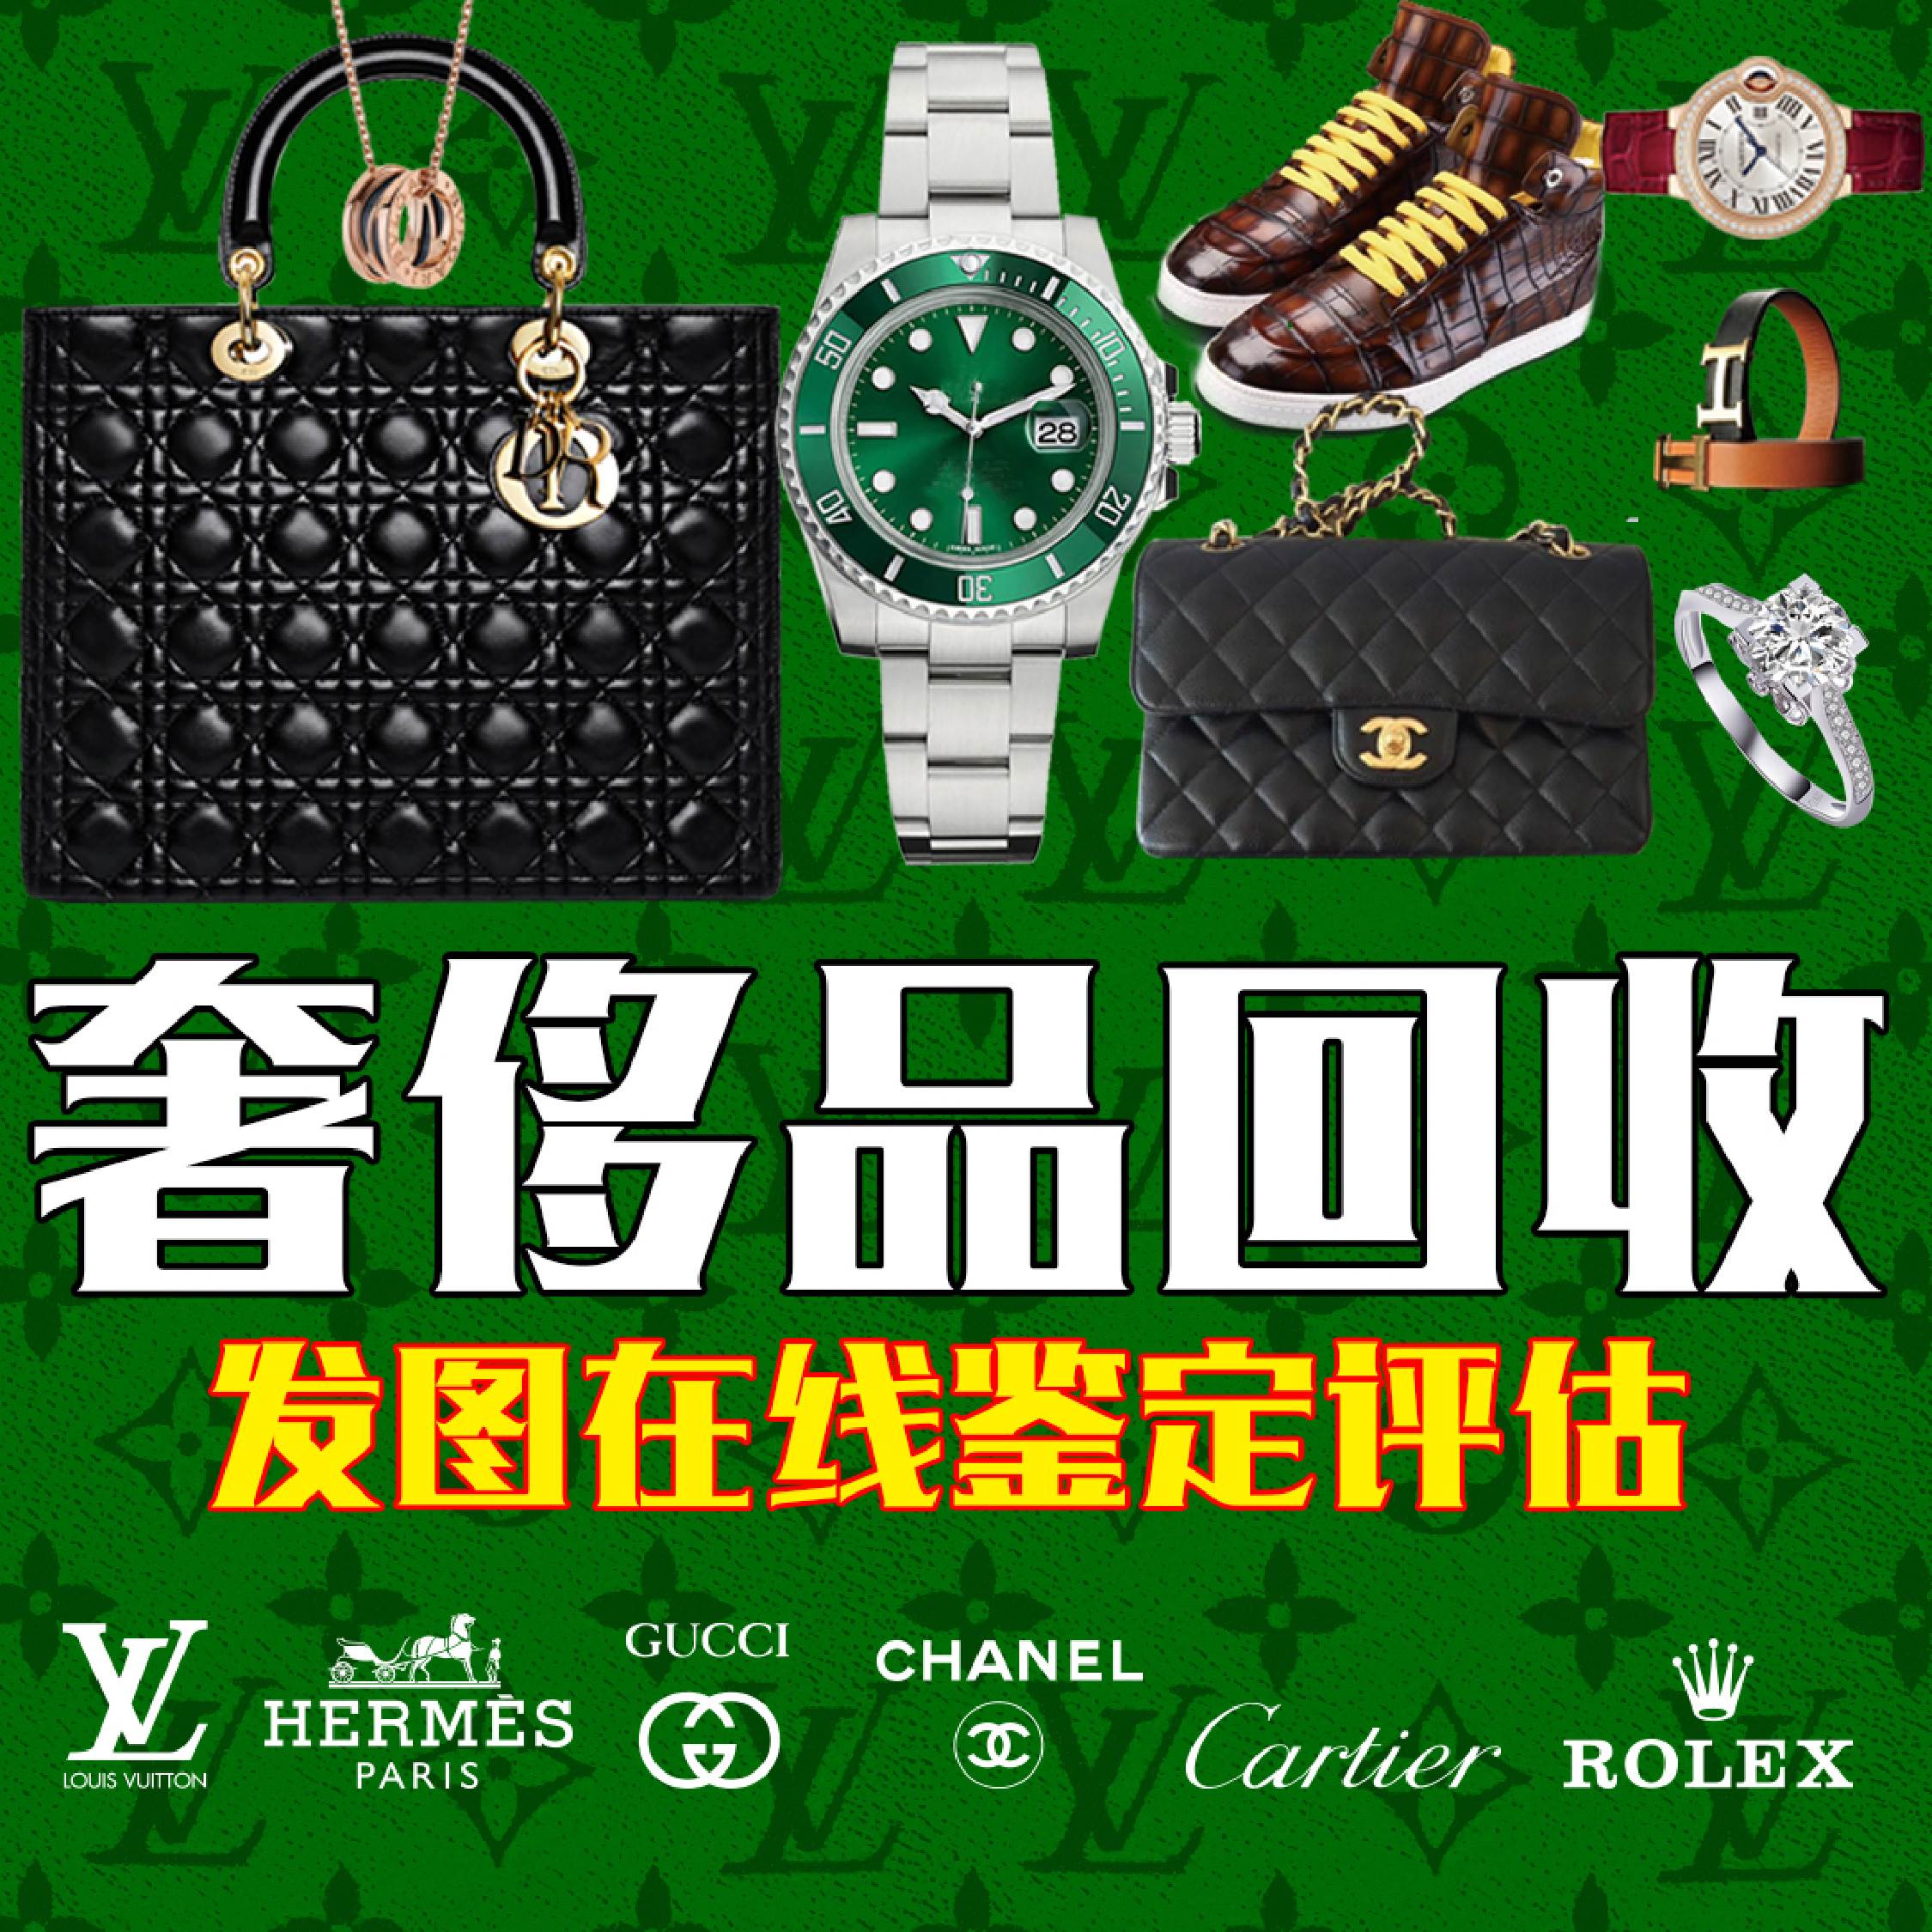 Chongqing Home Economics High priced Recycling Luxury Goods Appraisal and Evaluation Famous Brand Bags, Watches, Jewelry, Famous Bag Jewelry, Second Luxury Recycling Pawn